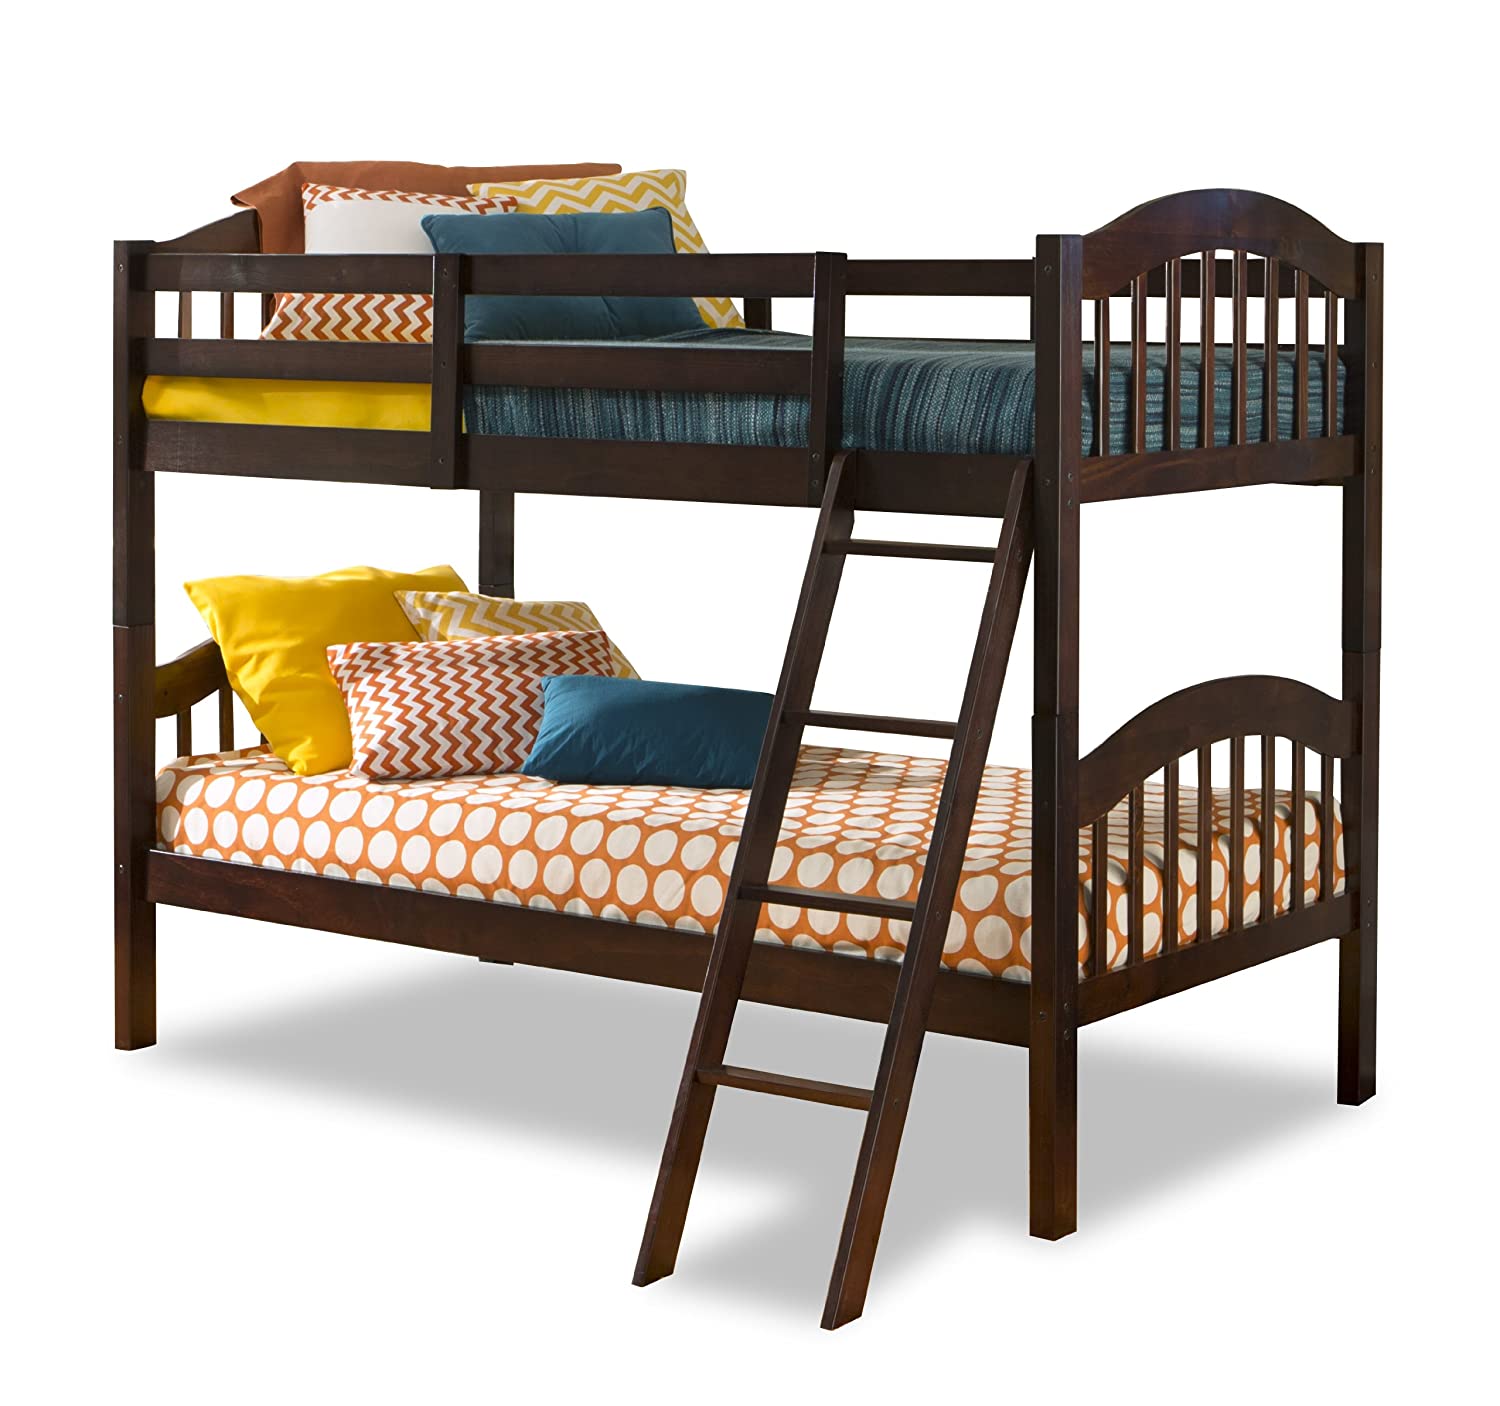 7 Best Kids Bunk Beds Under $200 2022 - Buying Guide 2